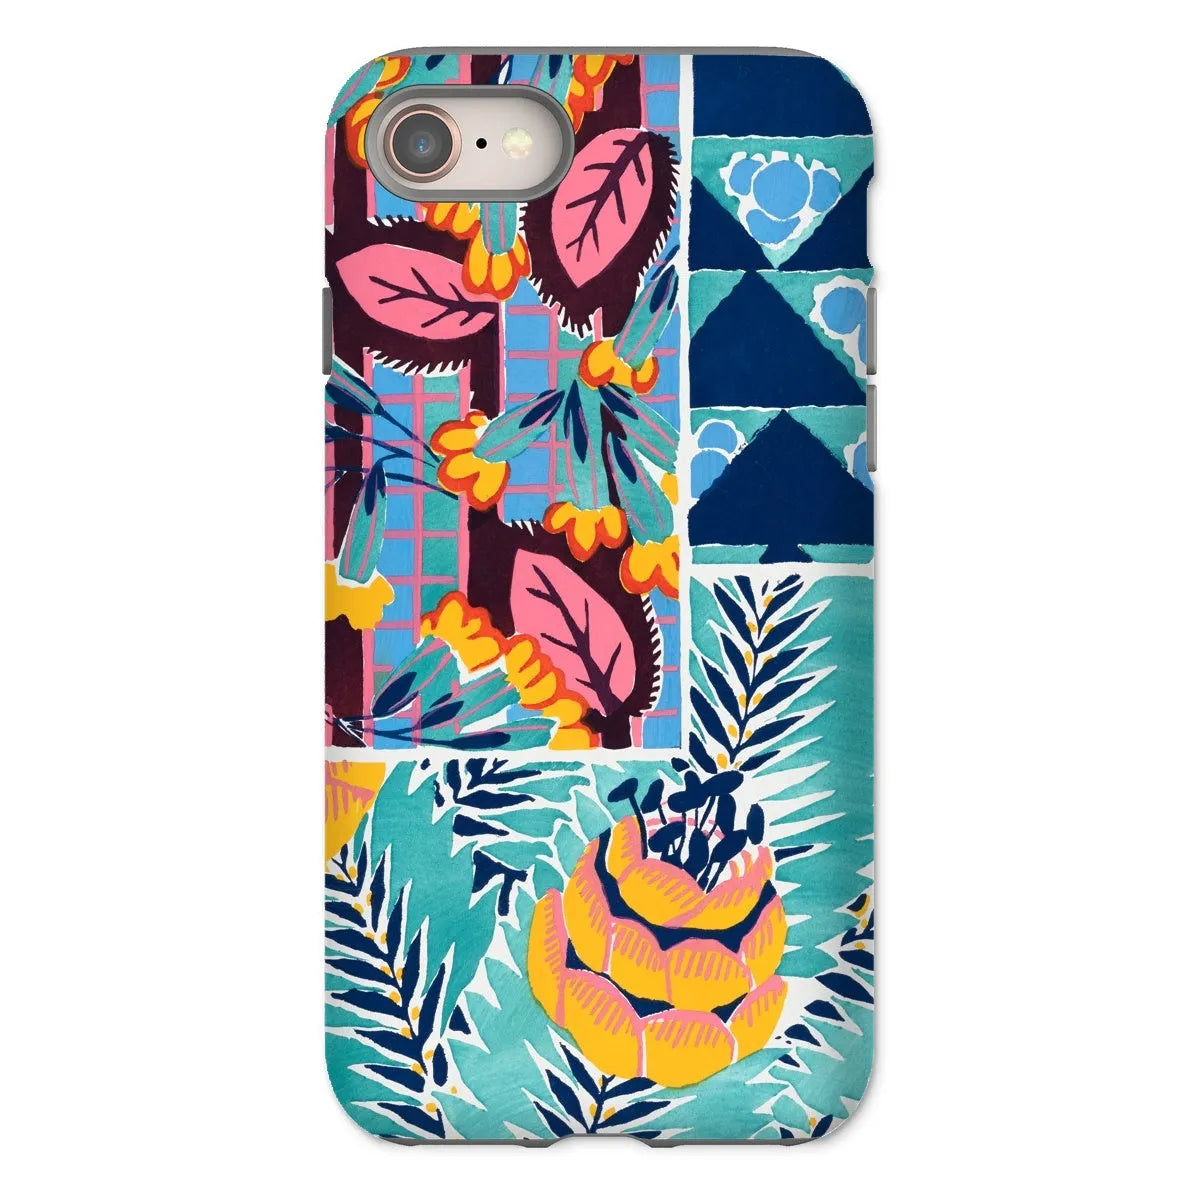 Fabric & Rugs - Pochoir Patterns Phone Case - E. A. Séguy - Iphone 8 / Matte - Mobile Phone Cases - Aesthetic Art